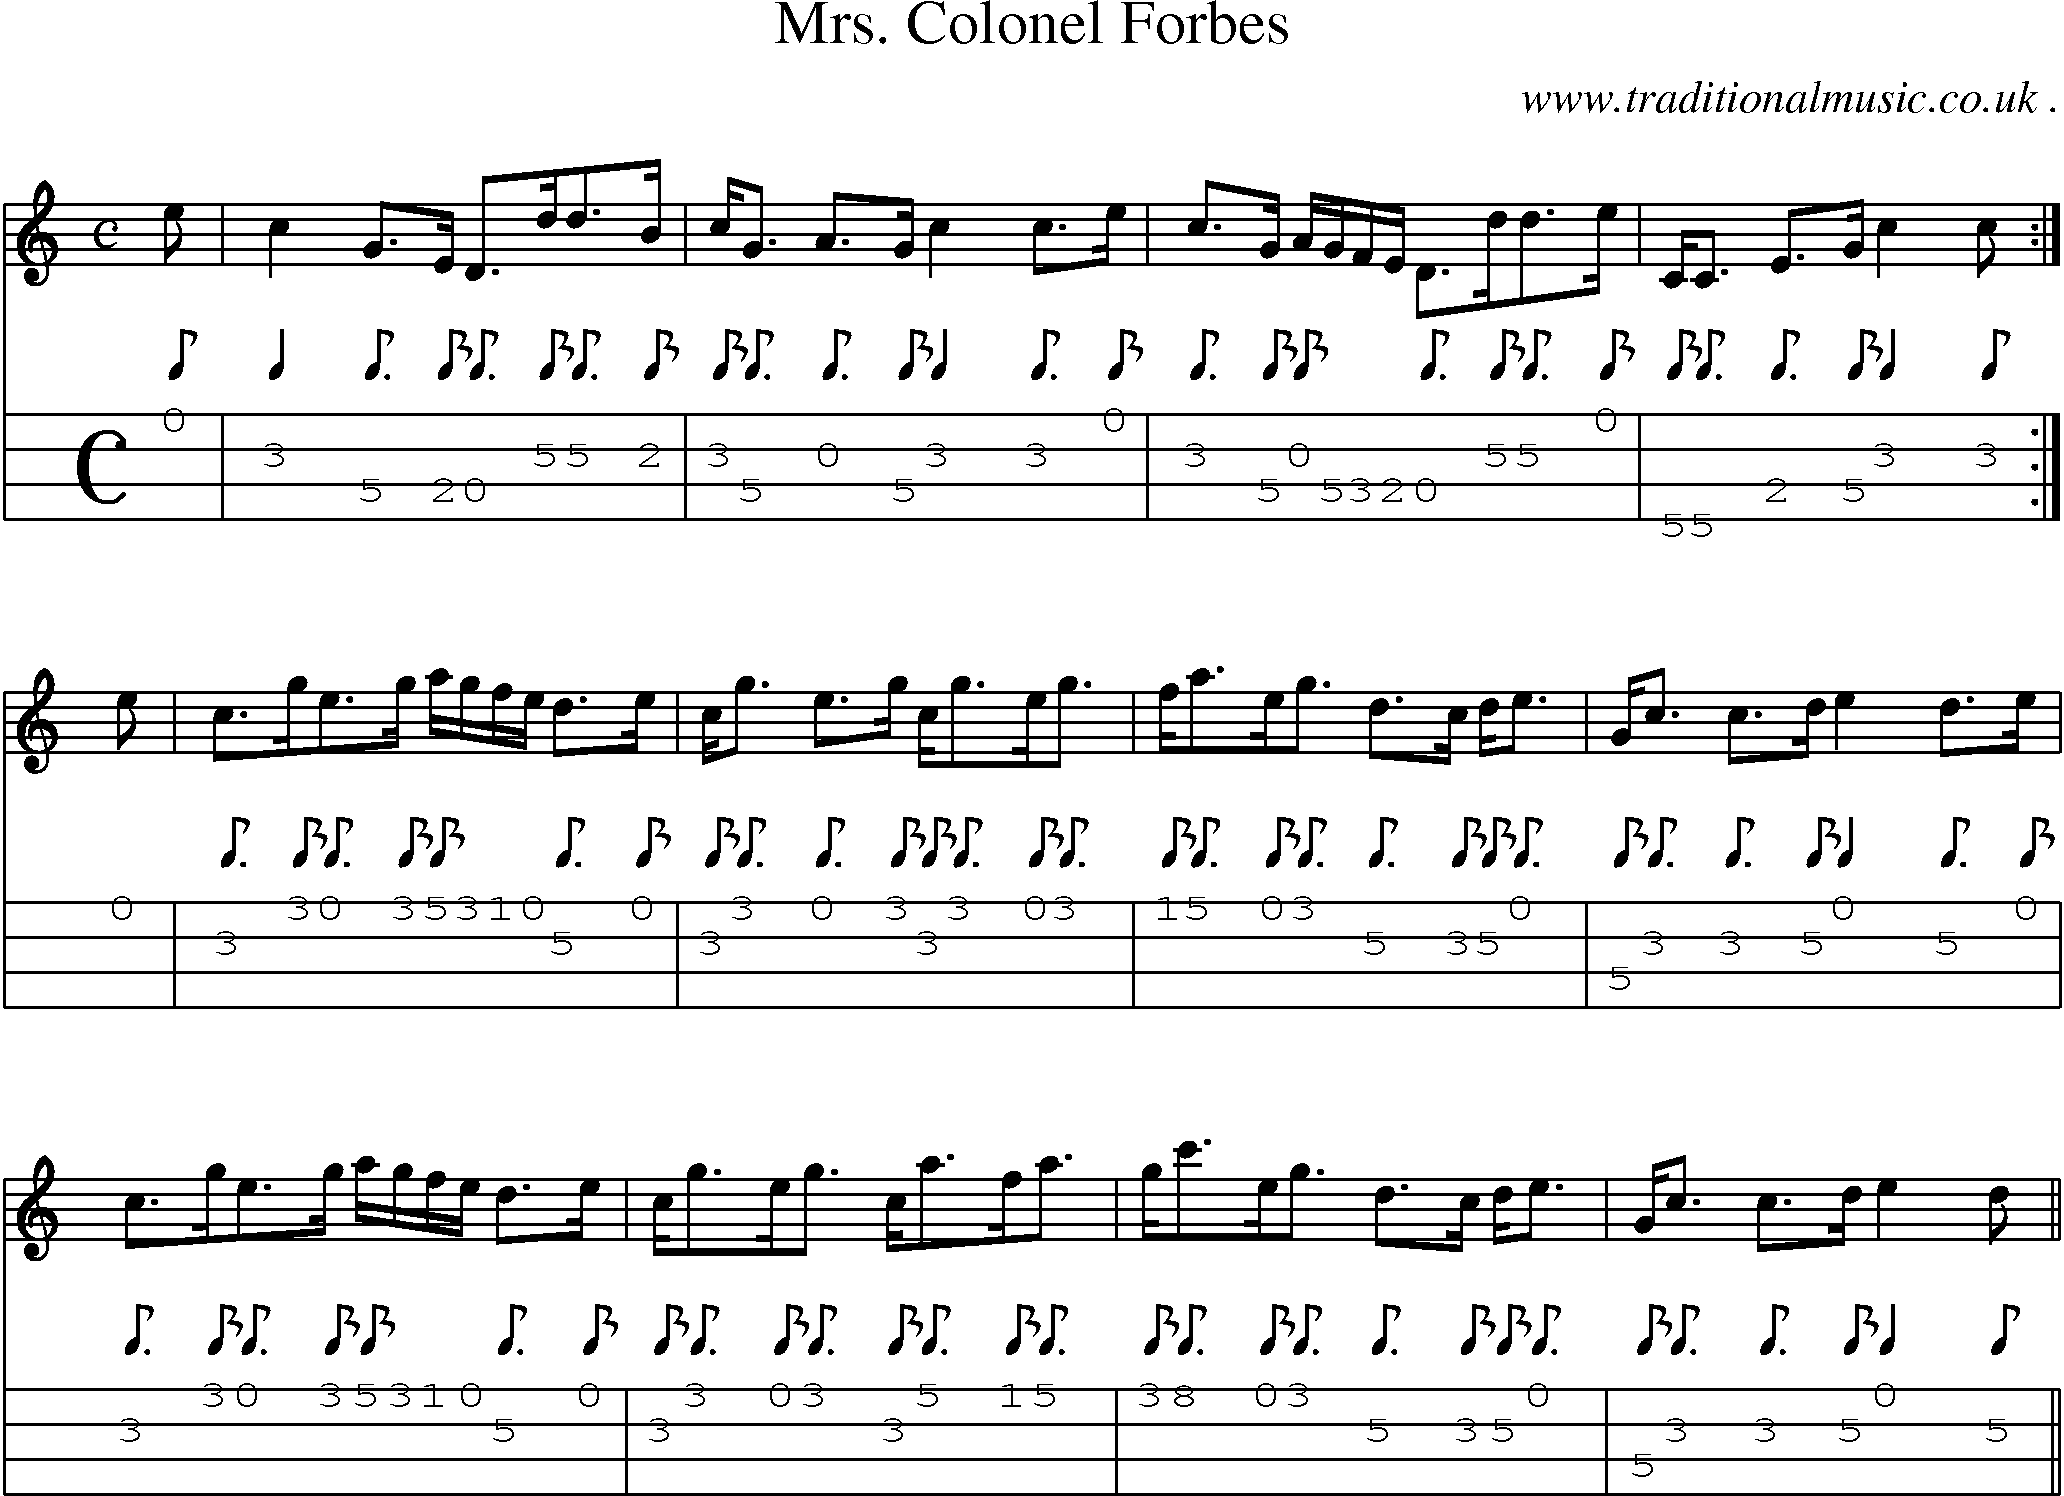 Sheet-music  score, Chords and Mandolin Tabs for Mrs Colonel Forbes